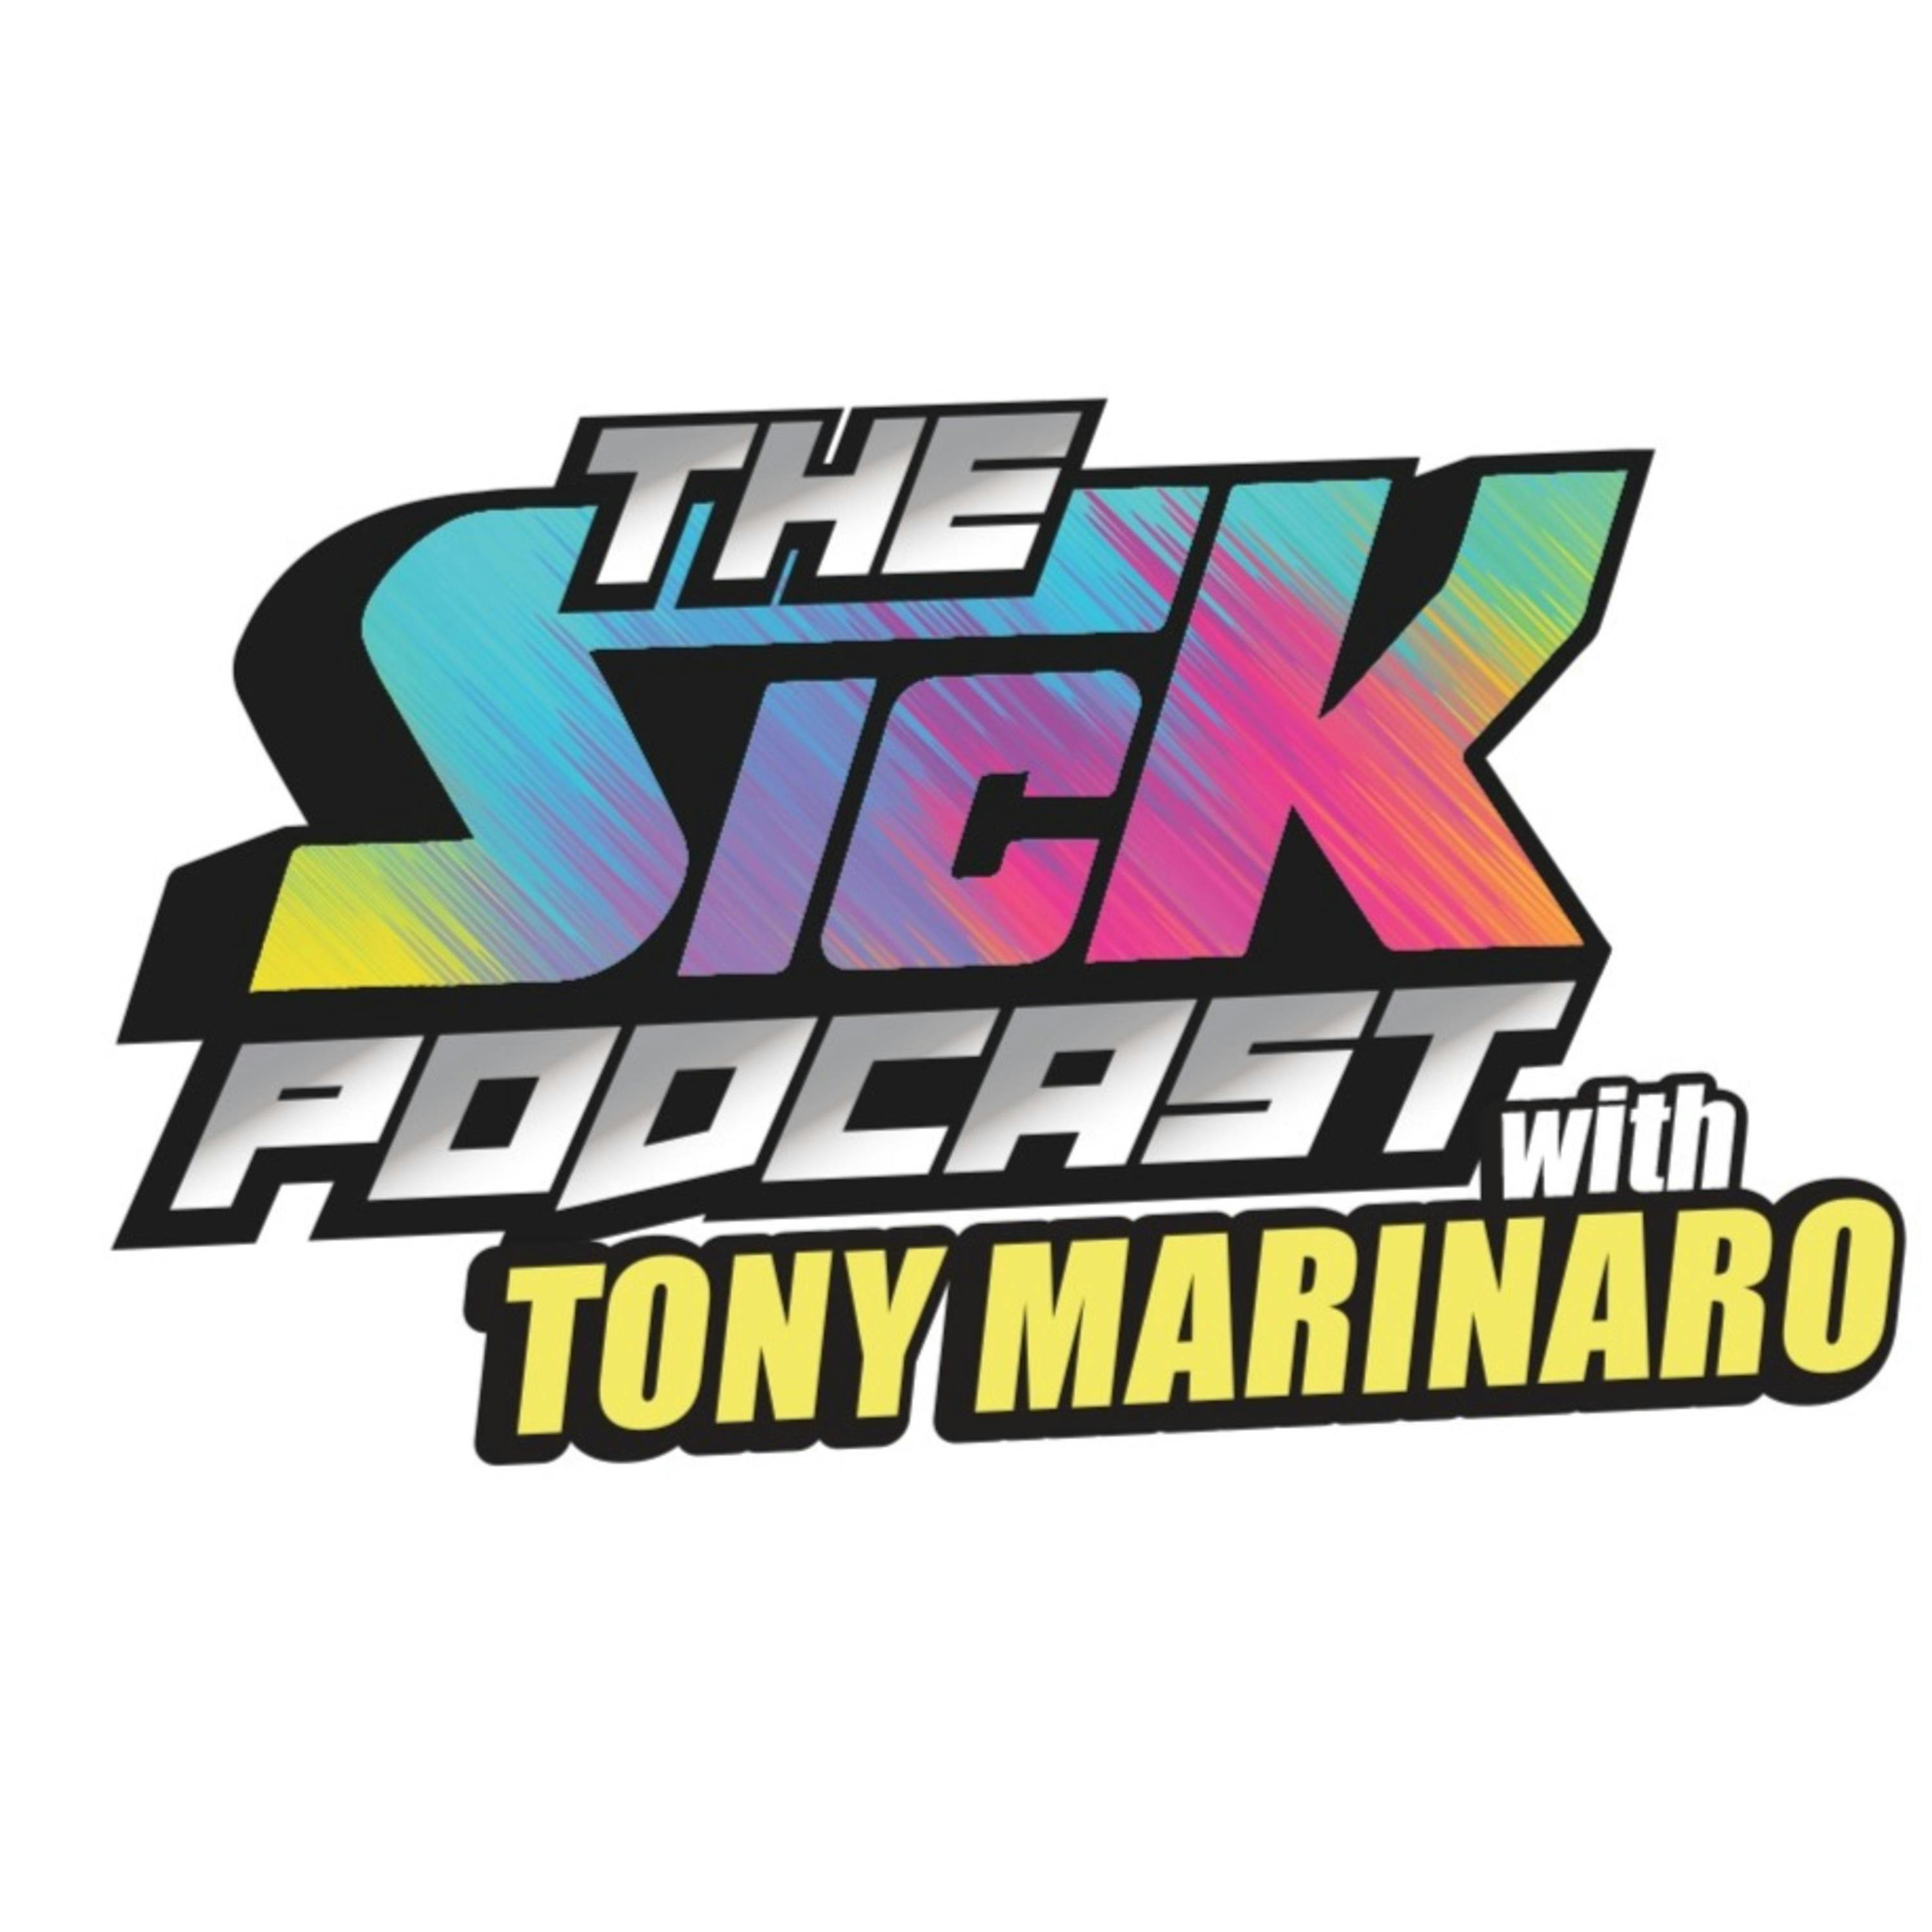 What's Happening With Kirby Dach? | The Sick Podcast with Tony Marinaro February 23 2023